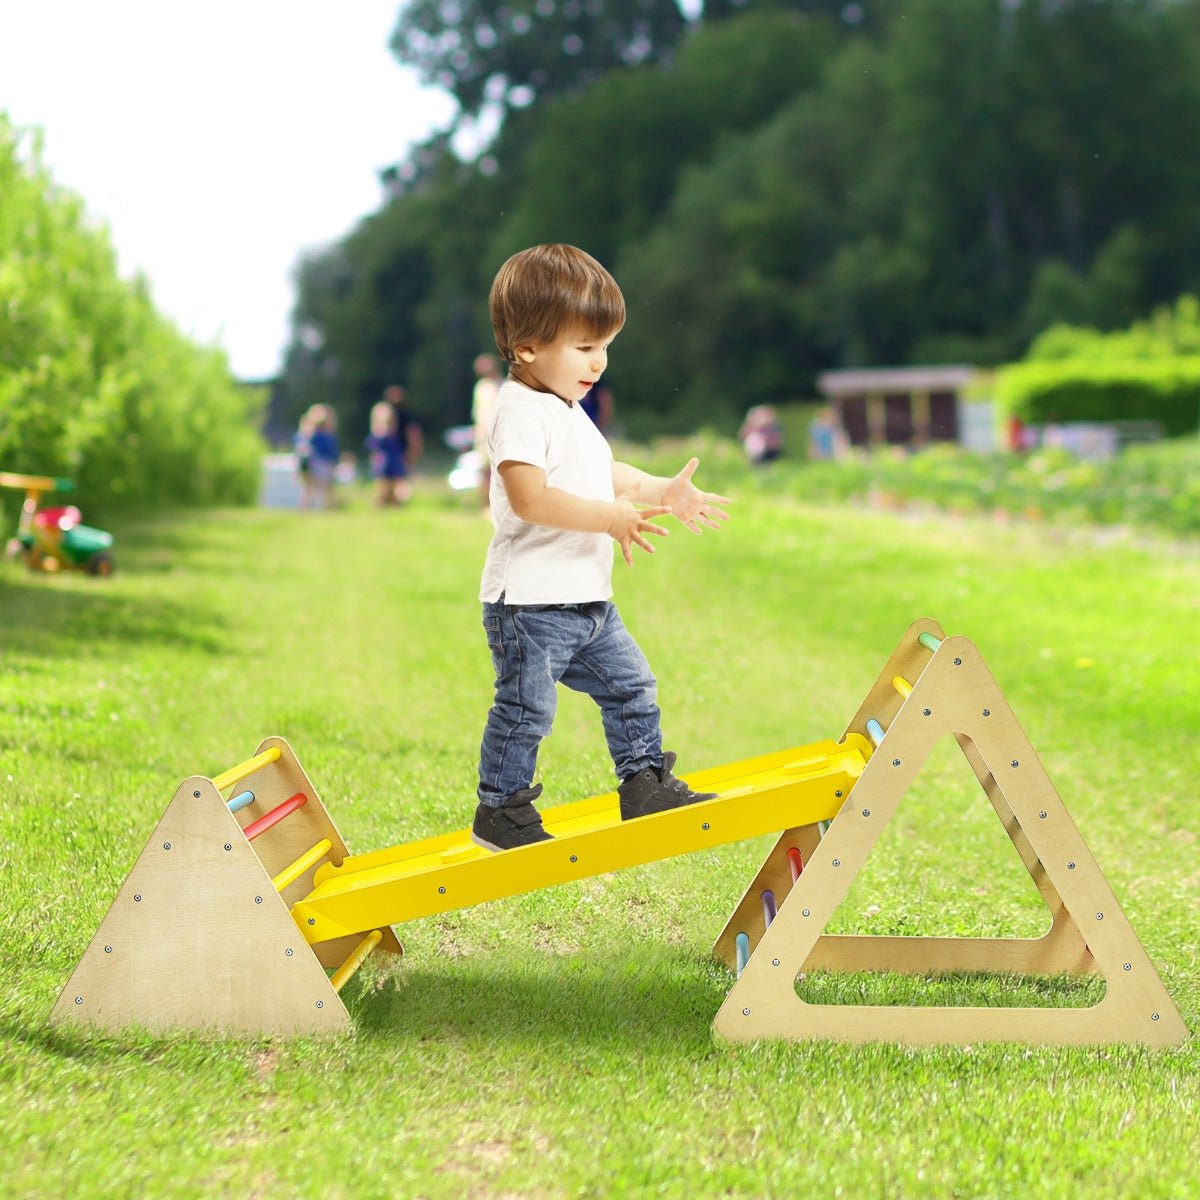 Toddler's 3 in 1 Climbing Toy - Triangle Ladders & Ramp for Fun